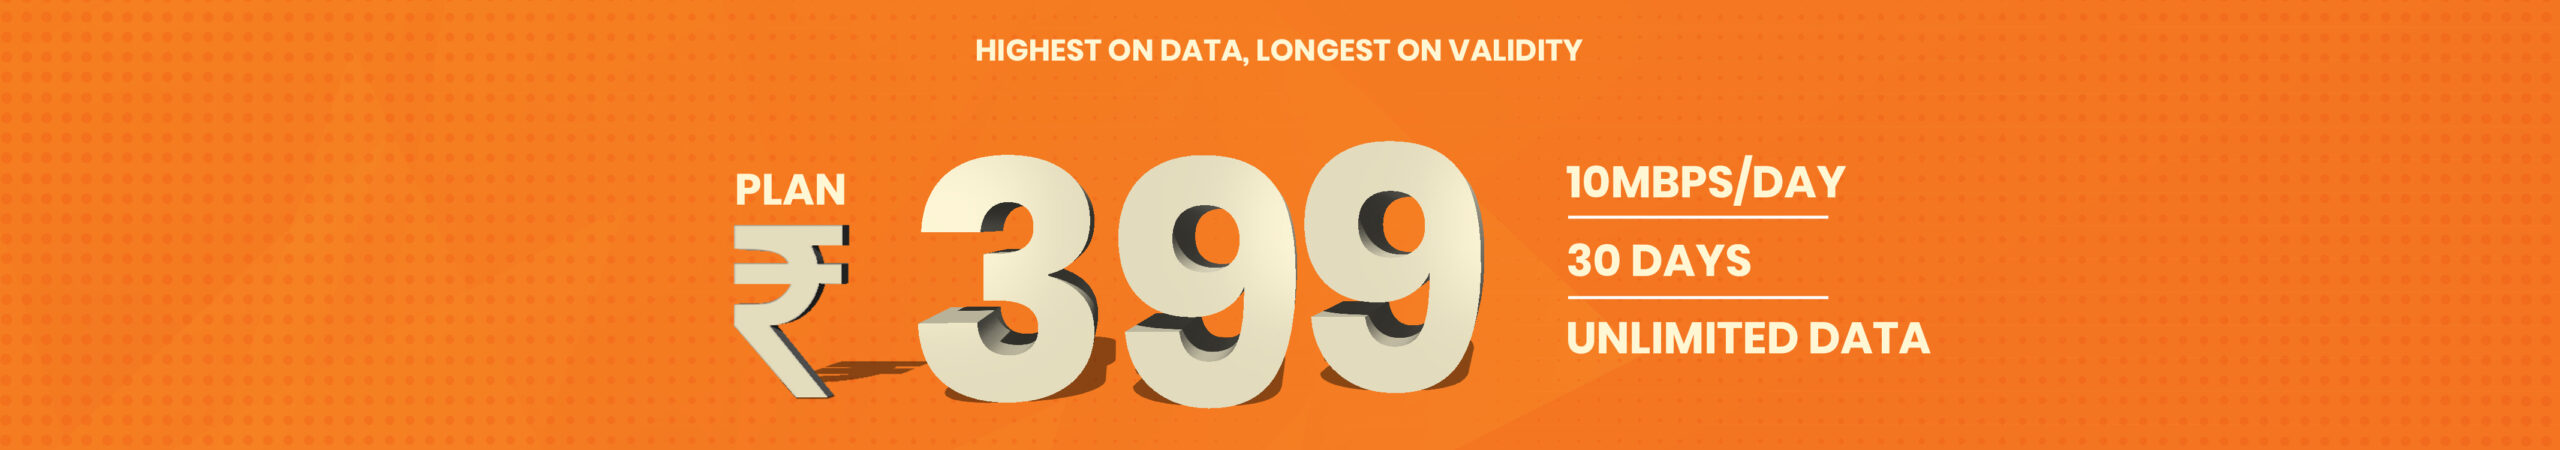 High speed unlimited data for 30 days 399 rupee